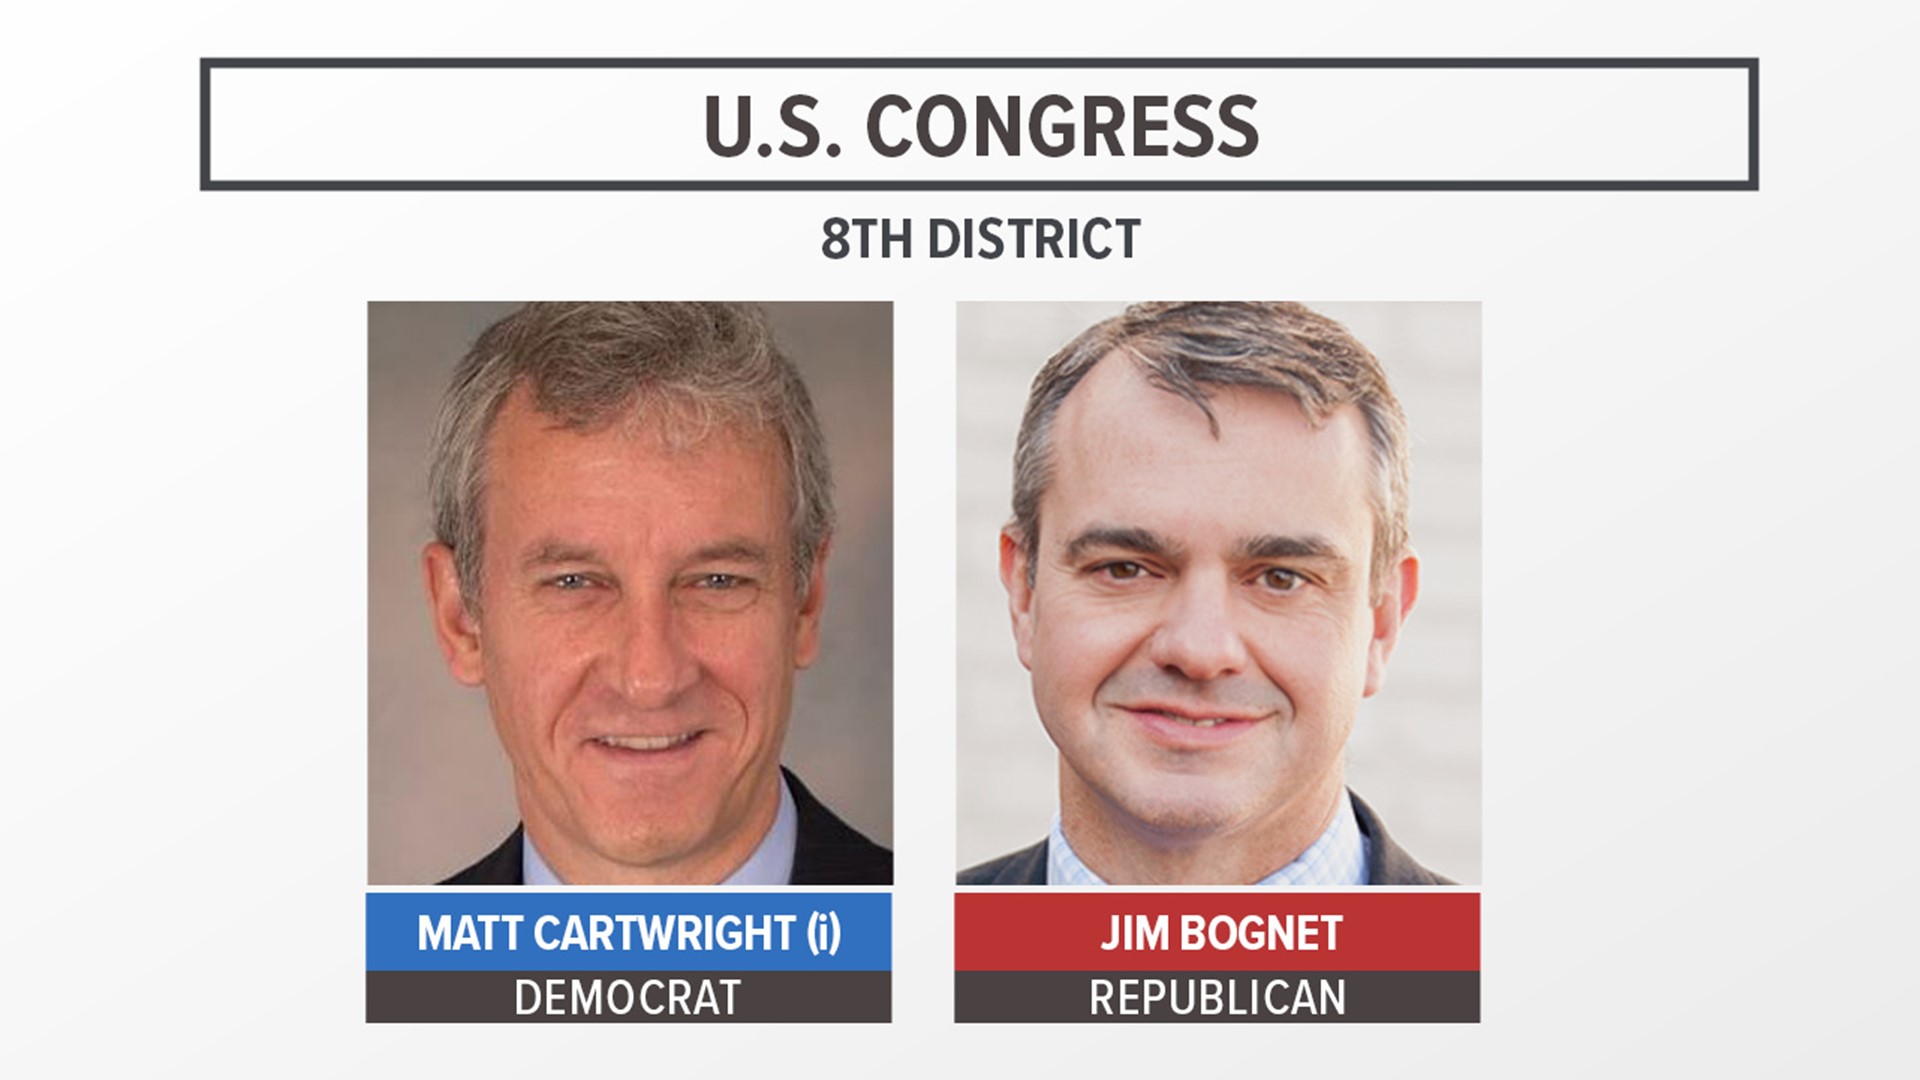 Incumbent Matt Cartwright (D) and Jim Bognet (R) are running in the general election in Pennsylvania's 8th Congressional District.